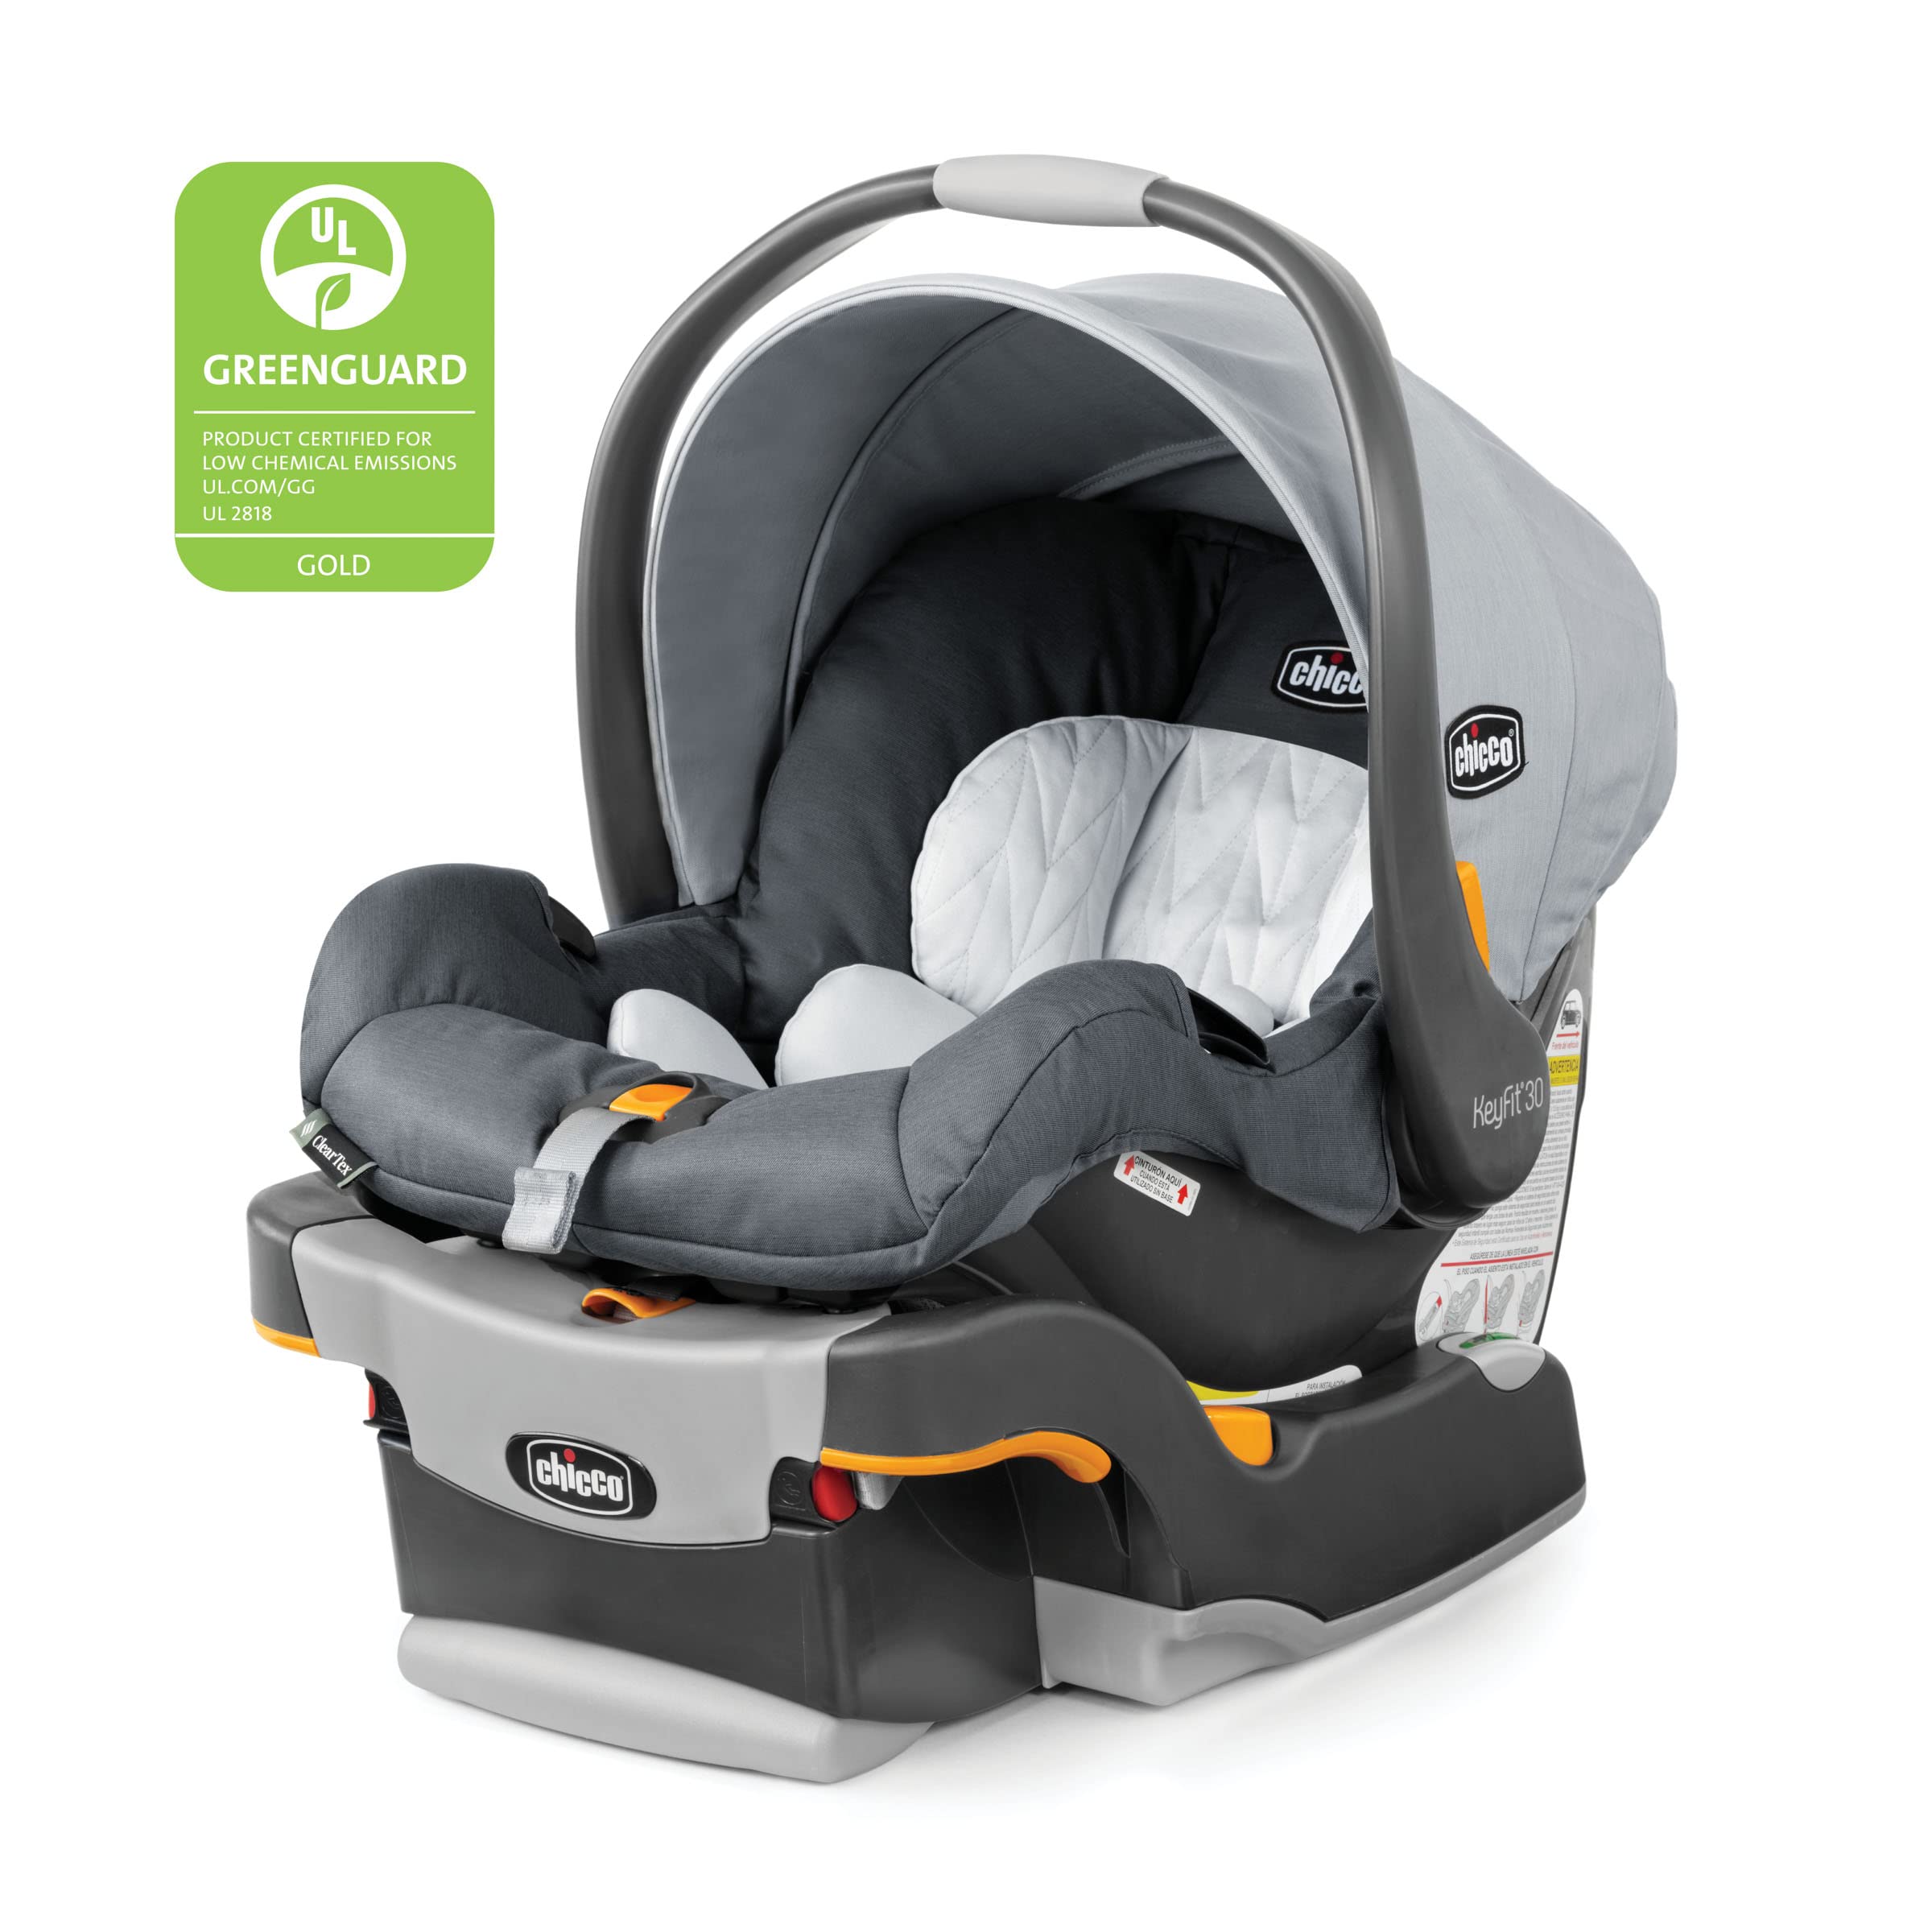 Chicco KeyFit 30 ClearTex Infant Car Seat and Base, Rear-Facing Seat for Infants 4-30 lbs., Includes Infant Head and Body Support, Compatible with Chicco Strollers, Baby Travel Gear | Slate/Grey